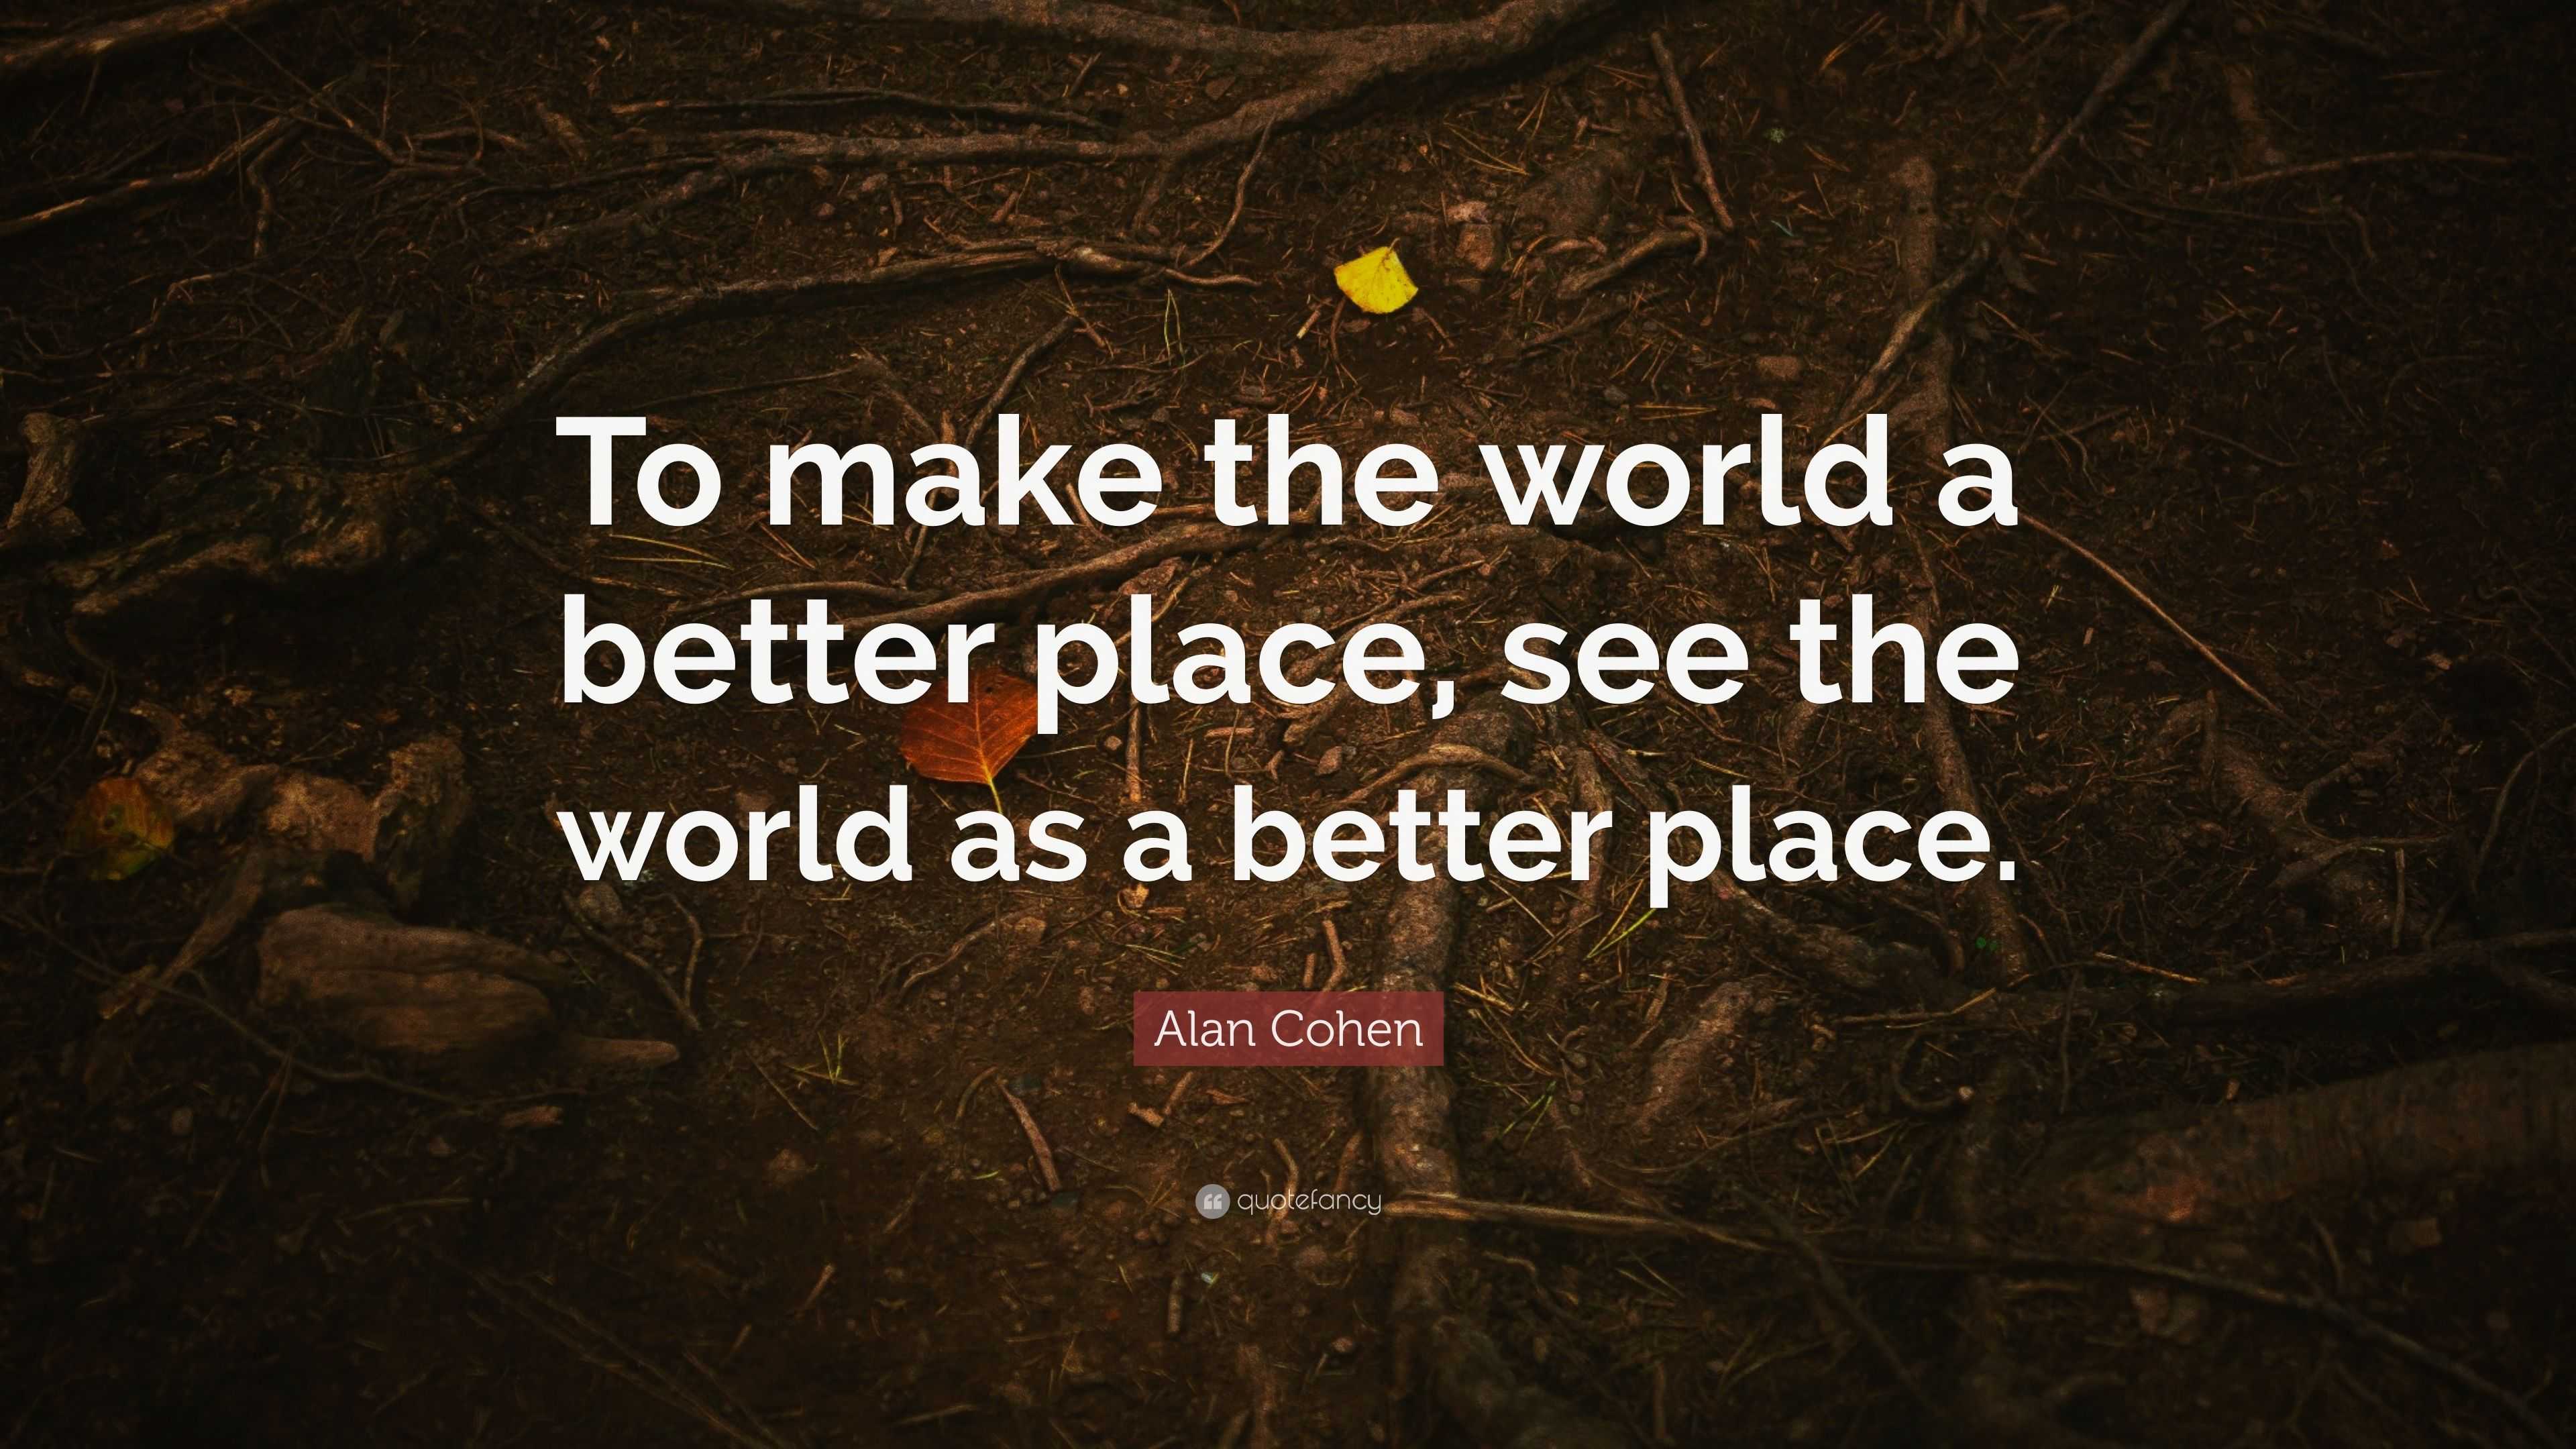 essay on how to make the world a better place